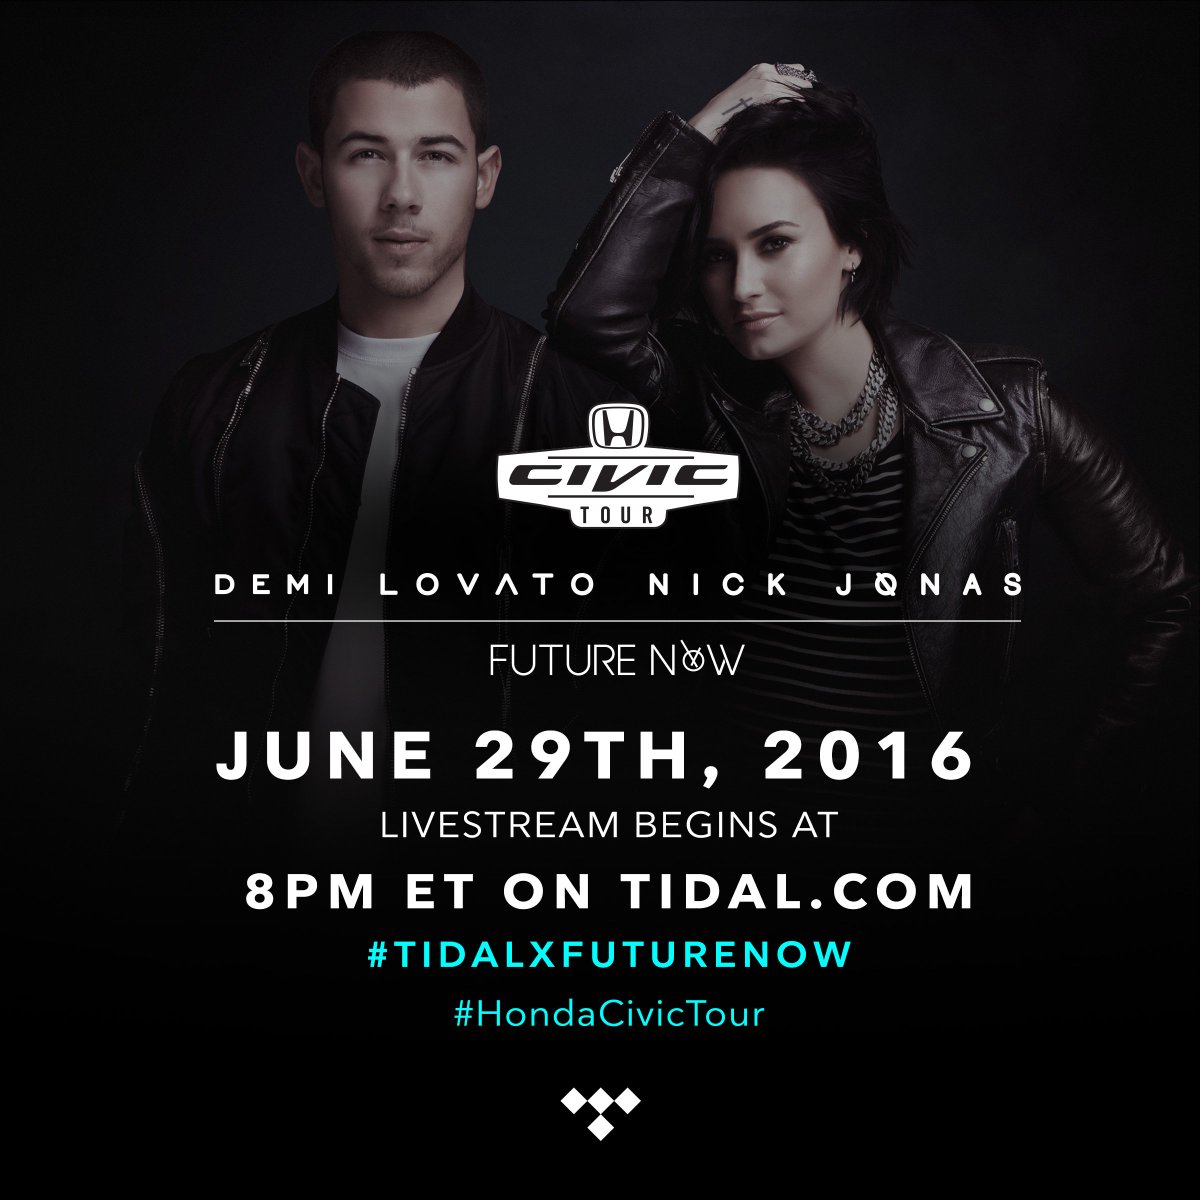 RT @TIDALHiFi: Can’t make it to the Honda Civic Tour? We’re livestreaming #TIDALXFUTURENOW on 6/29 on https://t.co/2FhRAd1iYo. https://t.co…